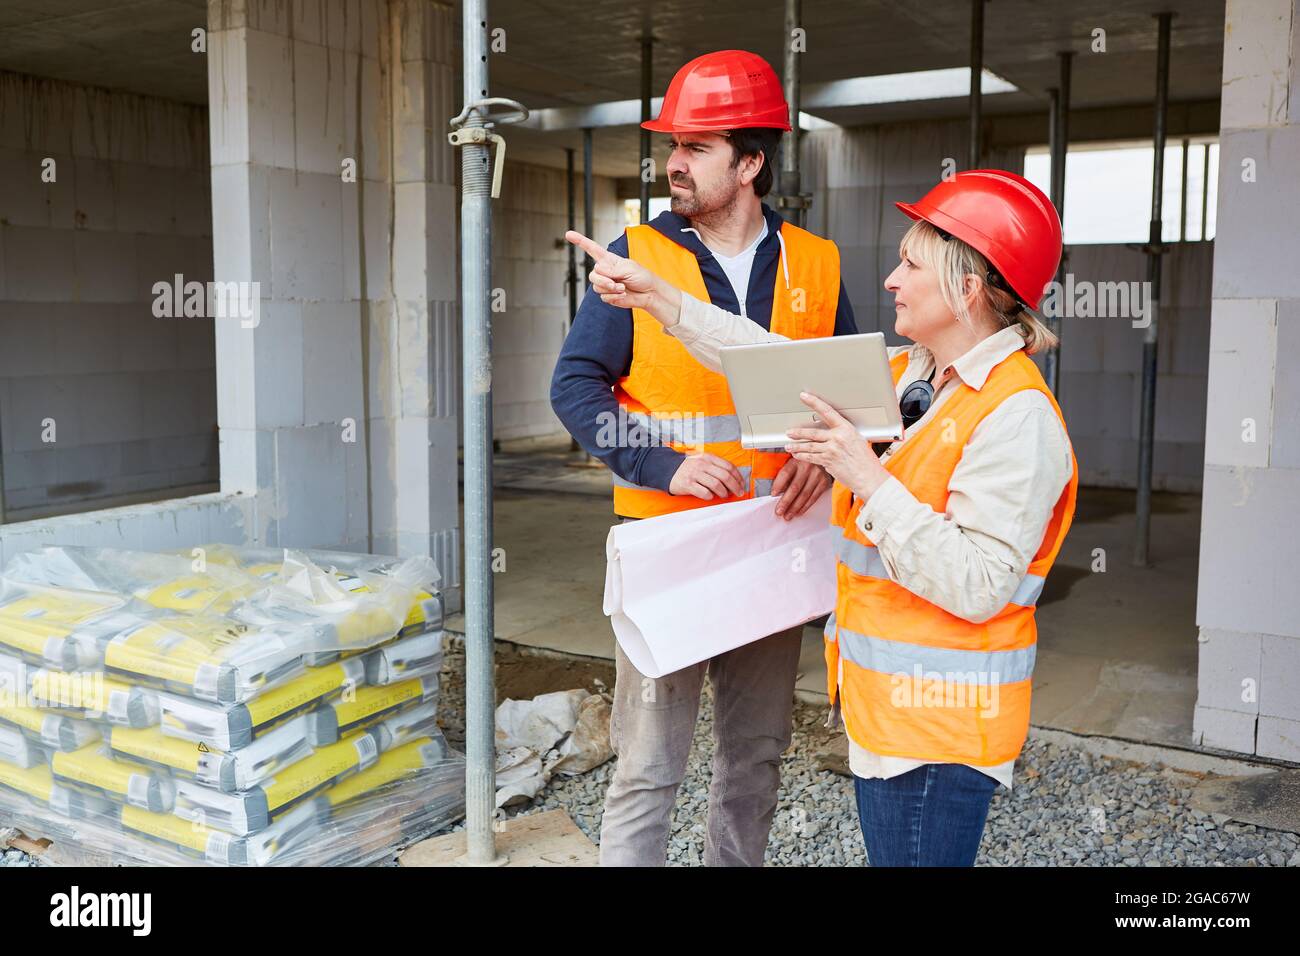 Architect with tablet computer on a construction site during construction planning with the foreman Stock Photo